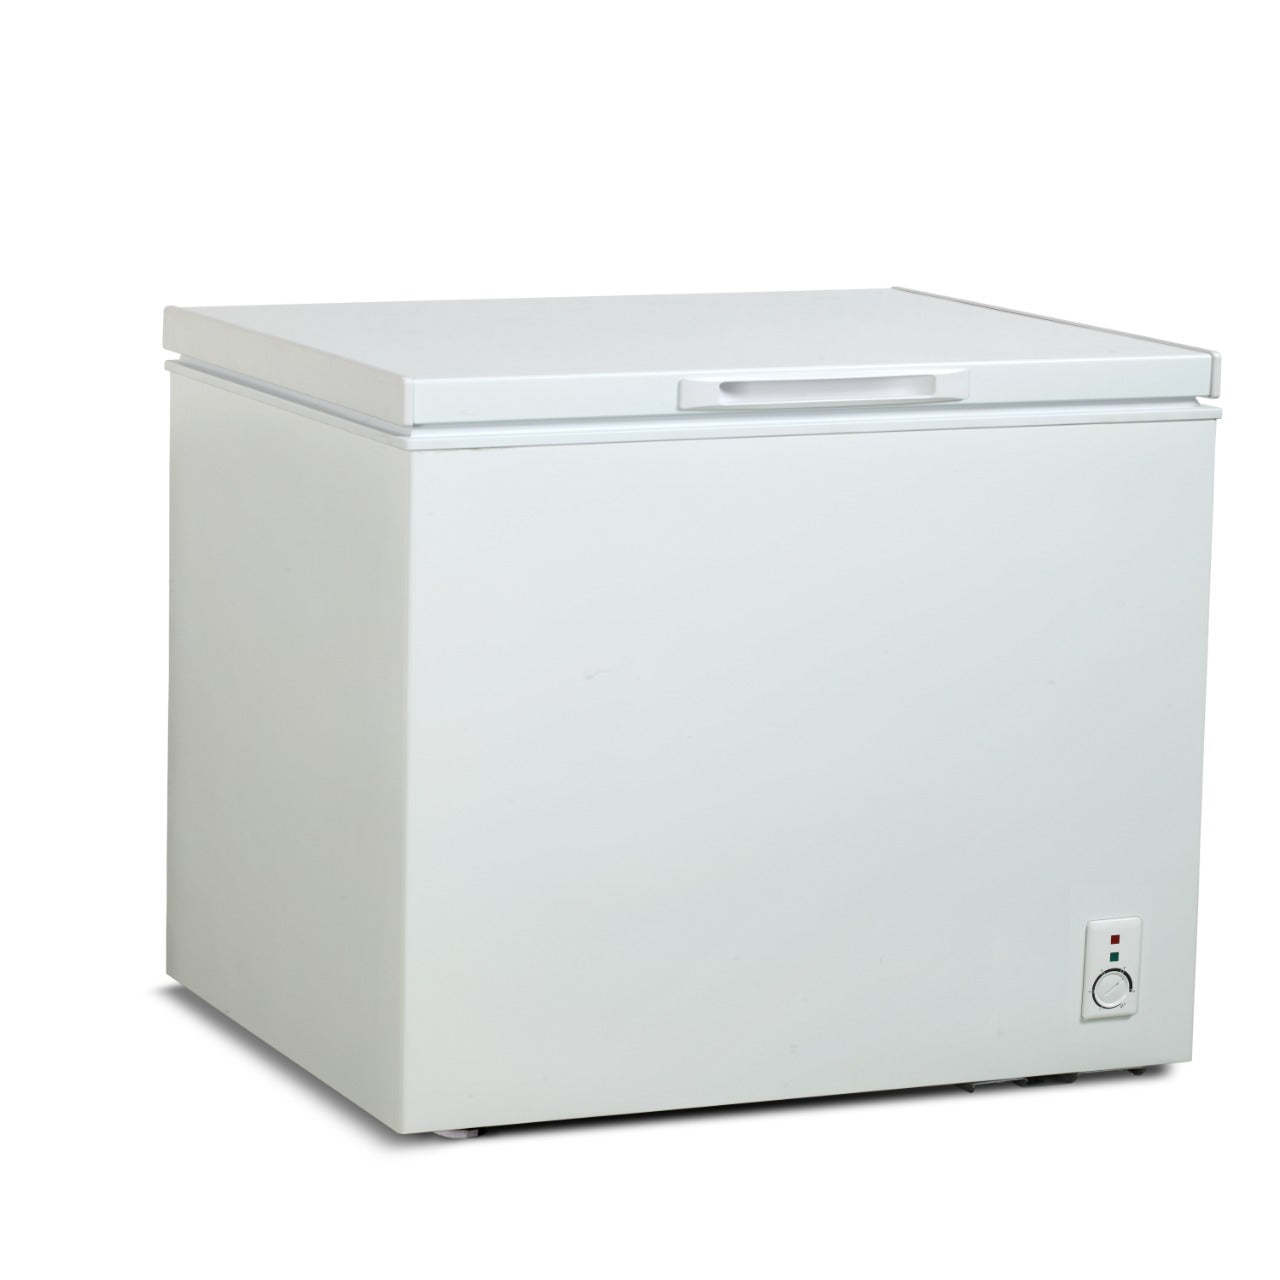 National Deluxe 150L Chest Freezer MF150